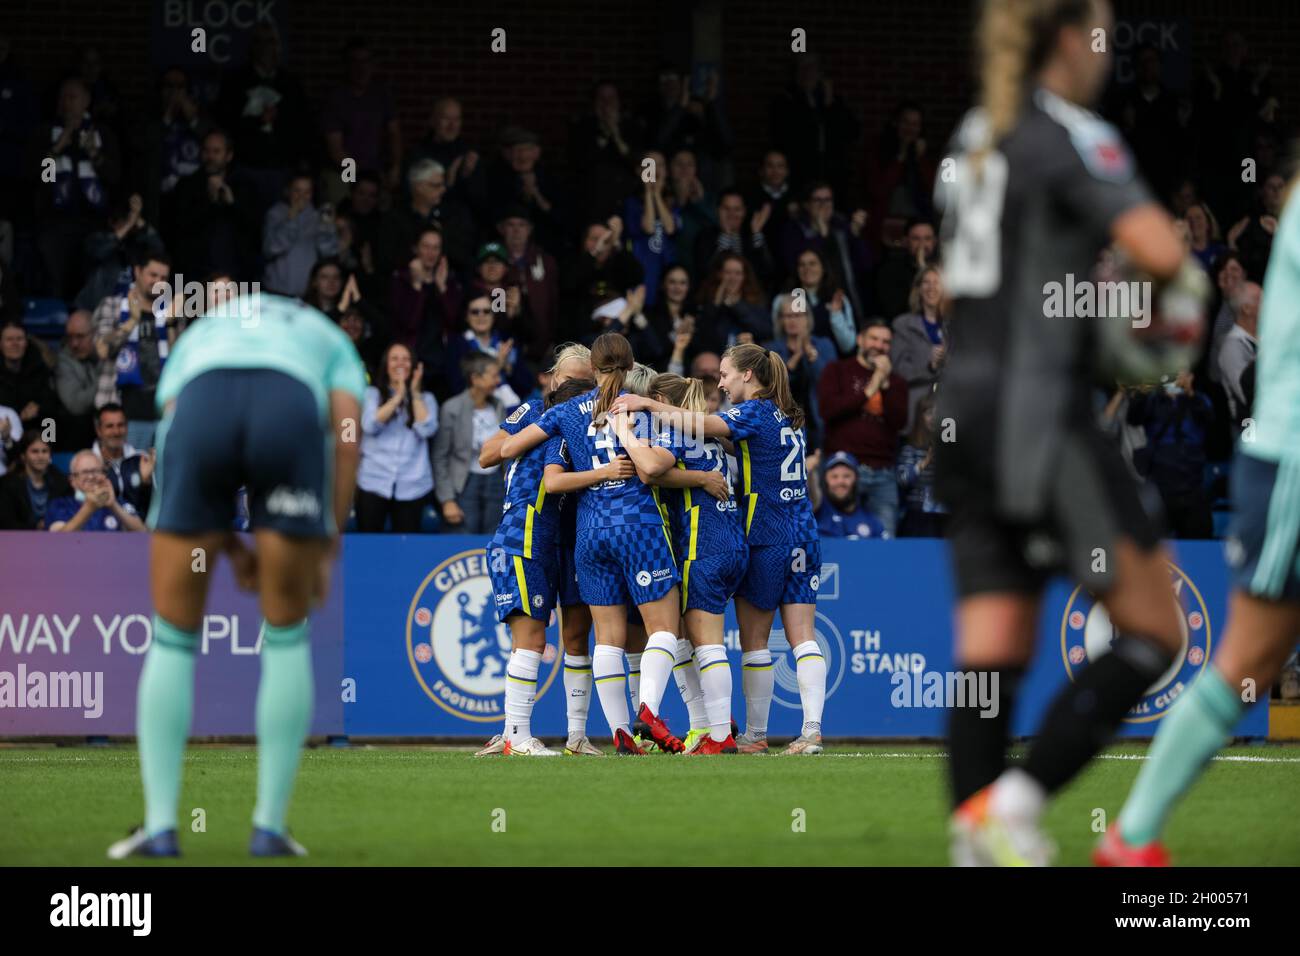 London, UK. 10th Oct, 2021. Chelsea celebrate their first goal at the Barclays FA Womens Super League game between Chelsea and Leicester City at Kingsmeadow in London, England. Credit: SPP Sport Press Photo. /Alamy Live News Stock Photo